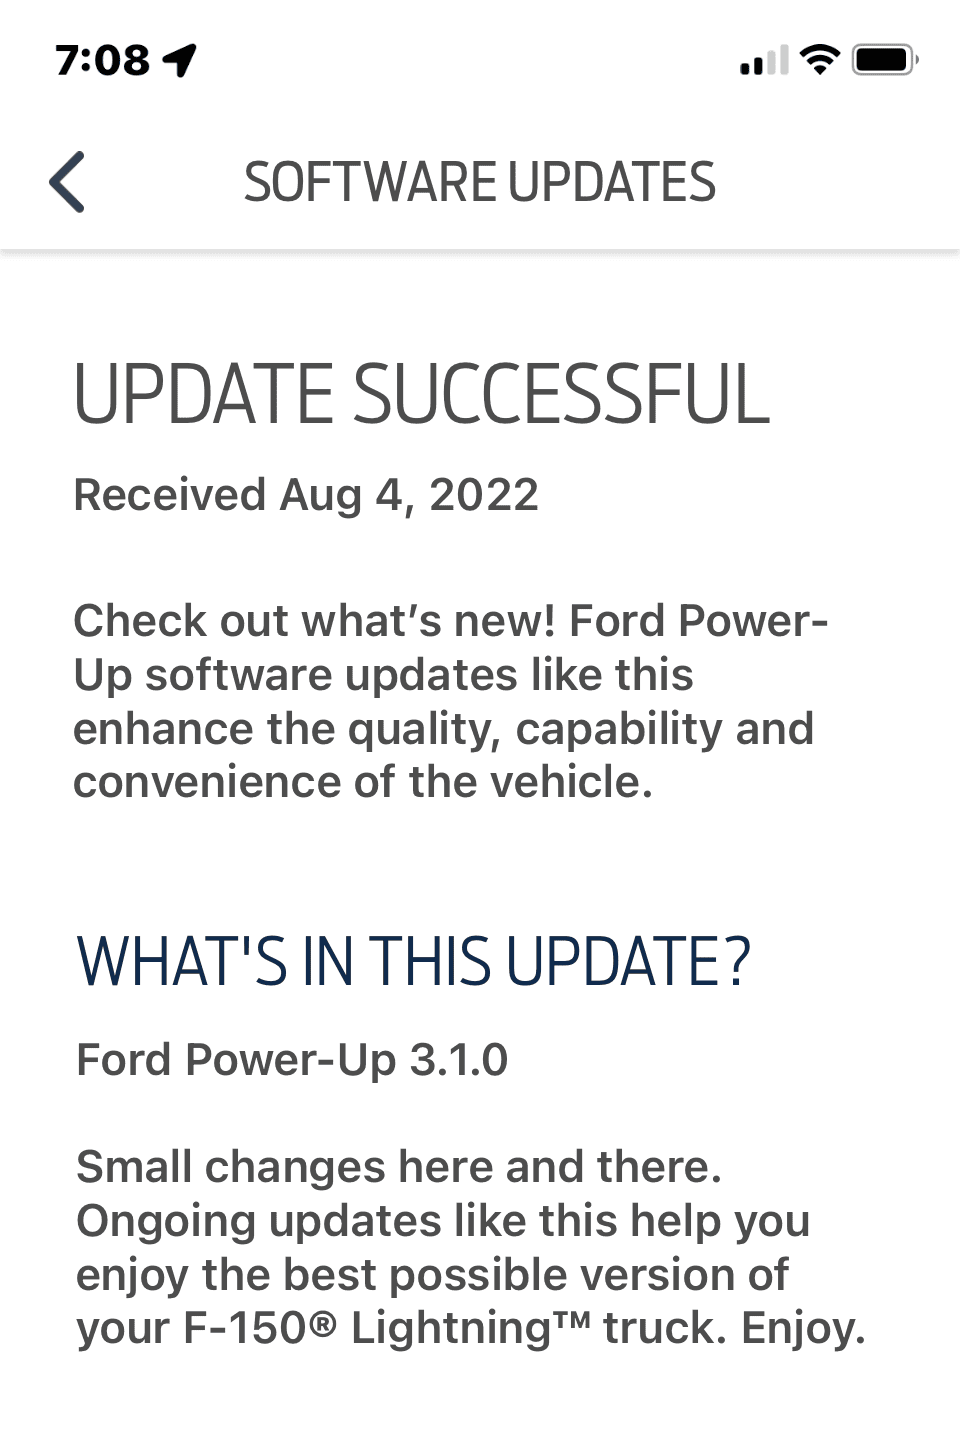 Ford F-150 Lightning Ford PowerUp 3.2 Software Update 8/4/22 Screenshot 2022-08-05 at 7.08.57 AM